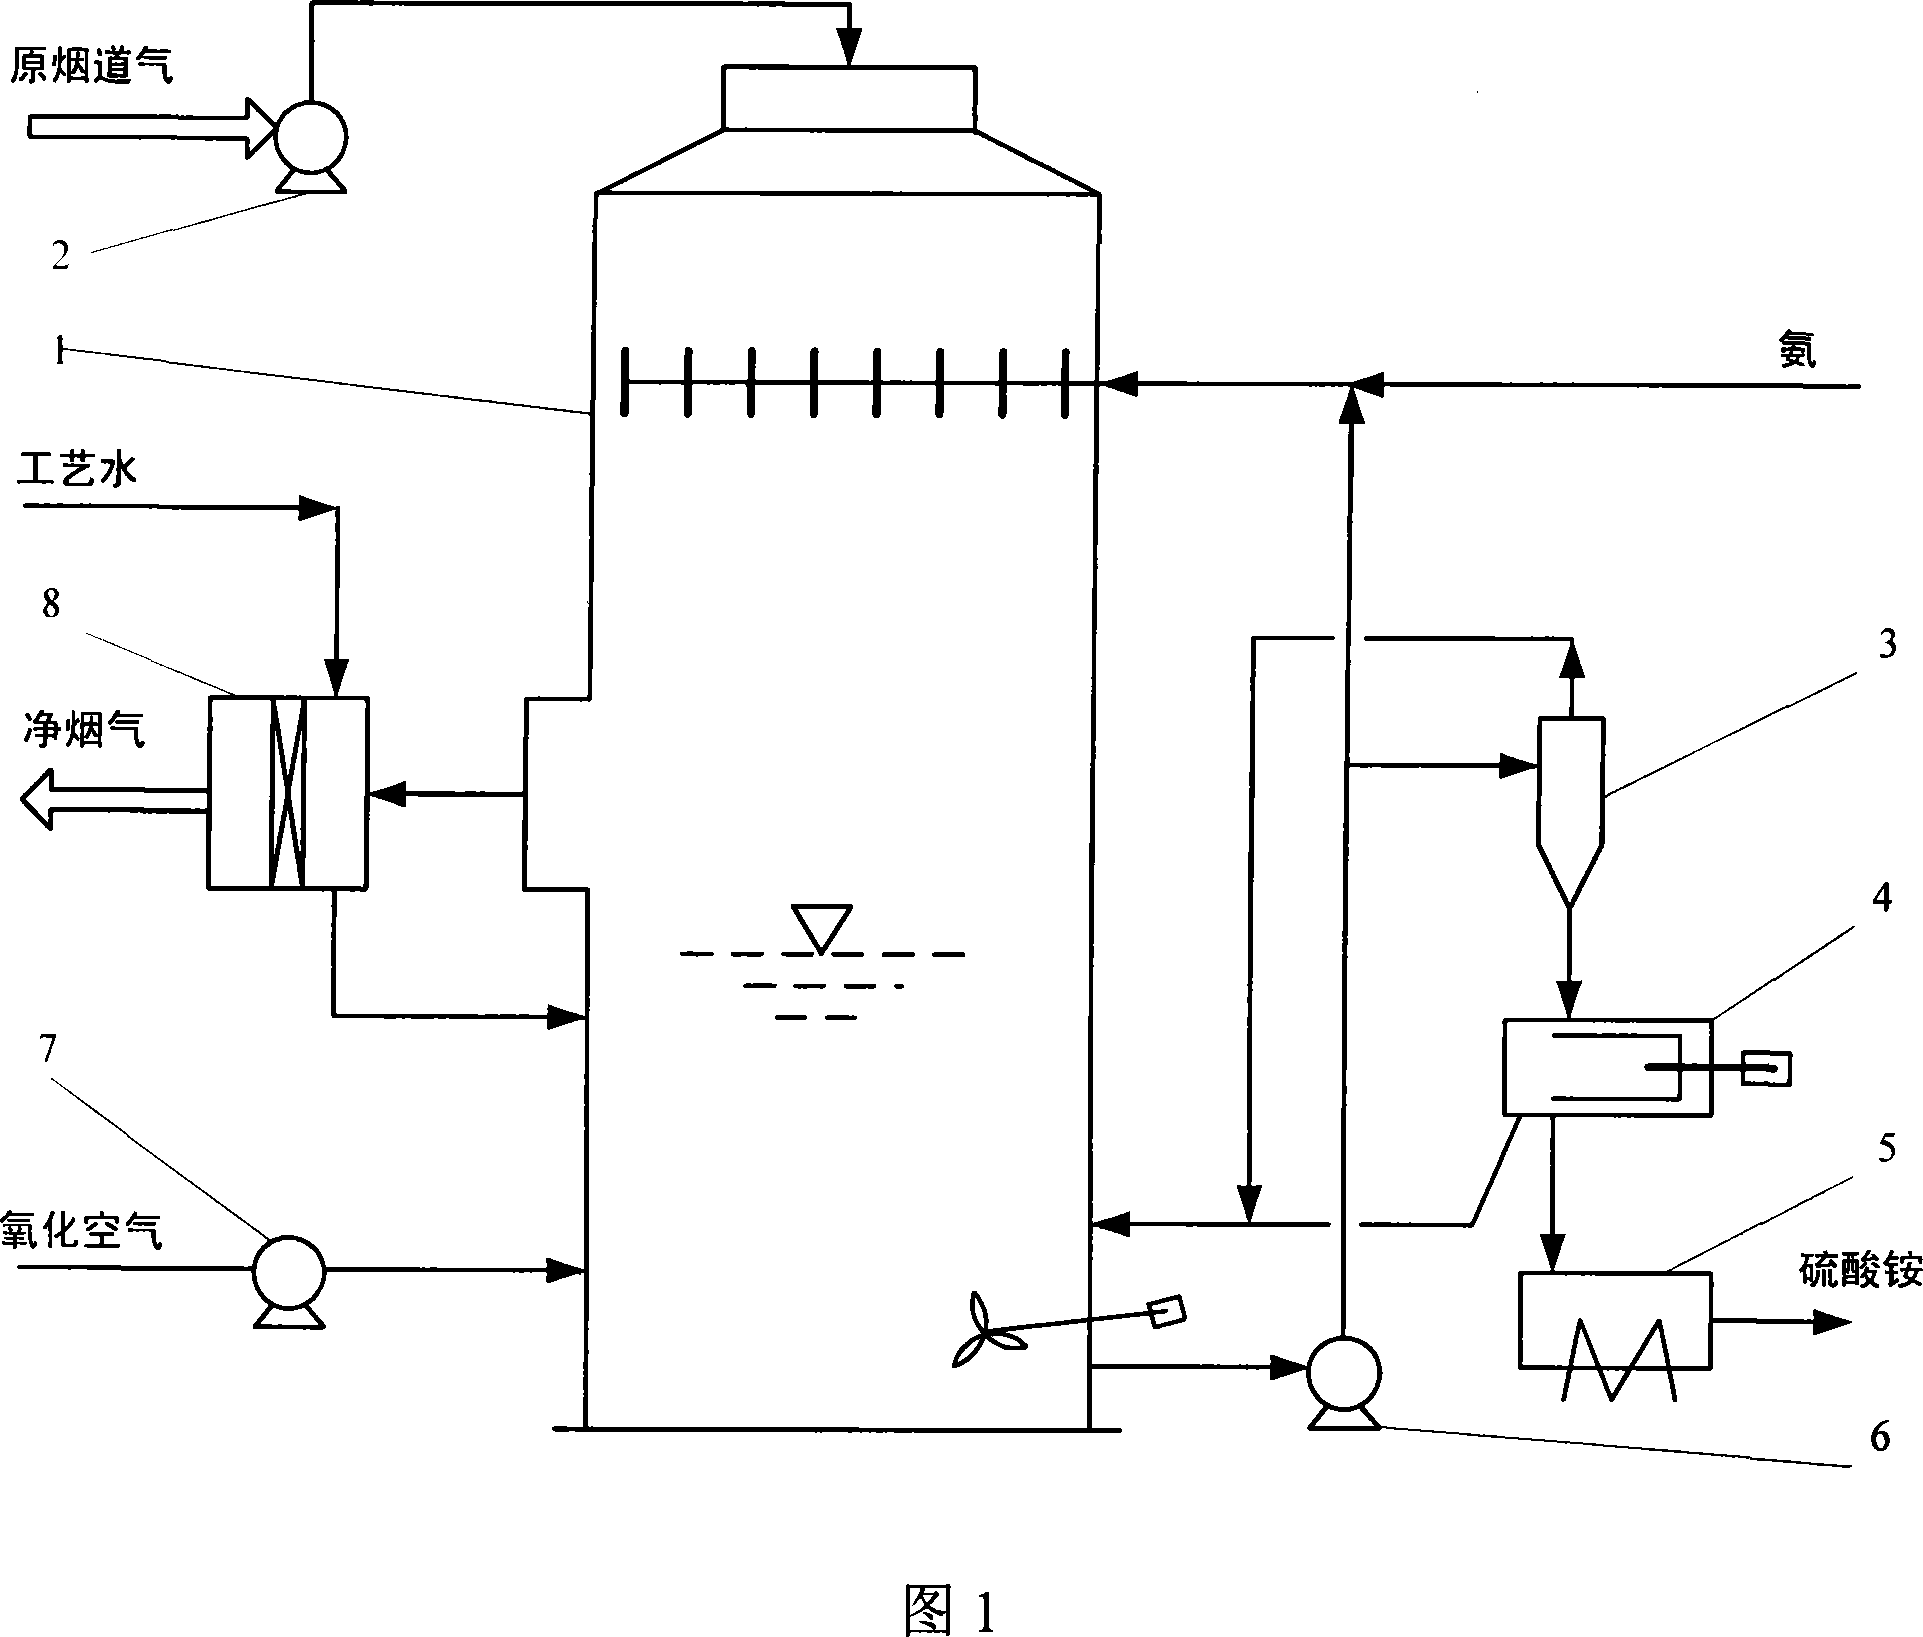 Method, system and product for reclaiming sulfoxides from flue gas